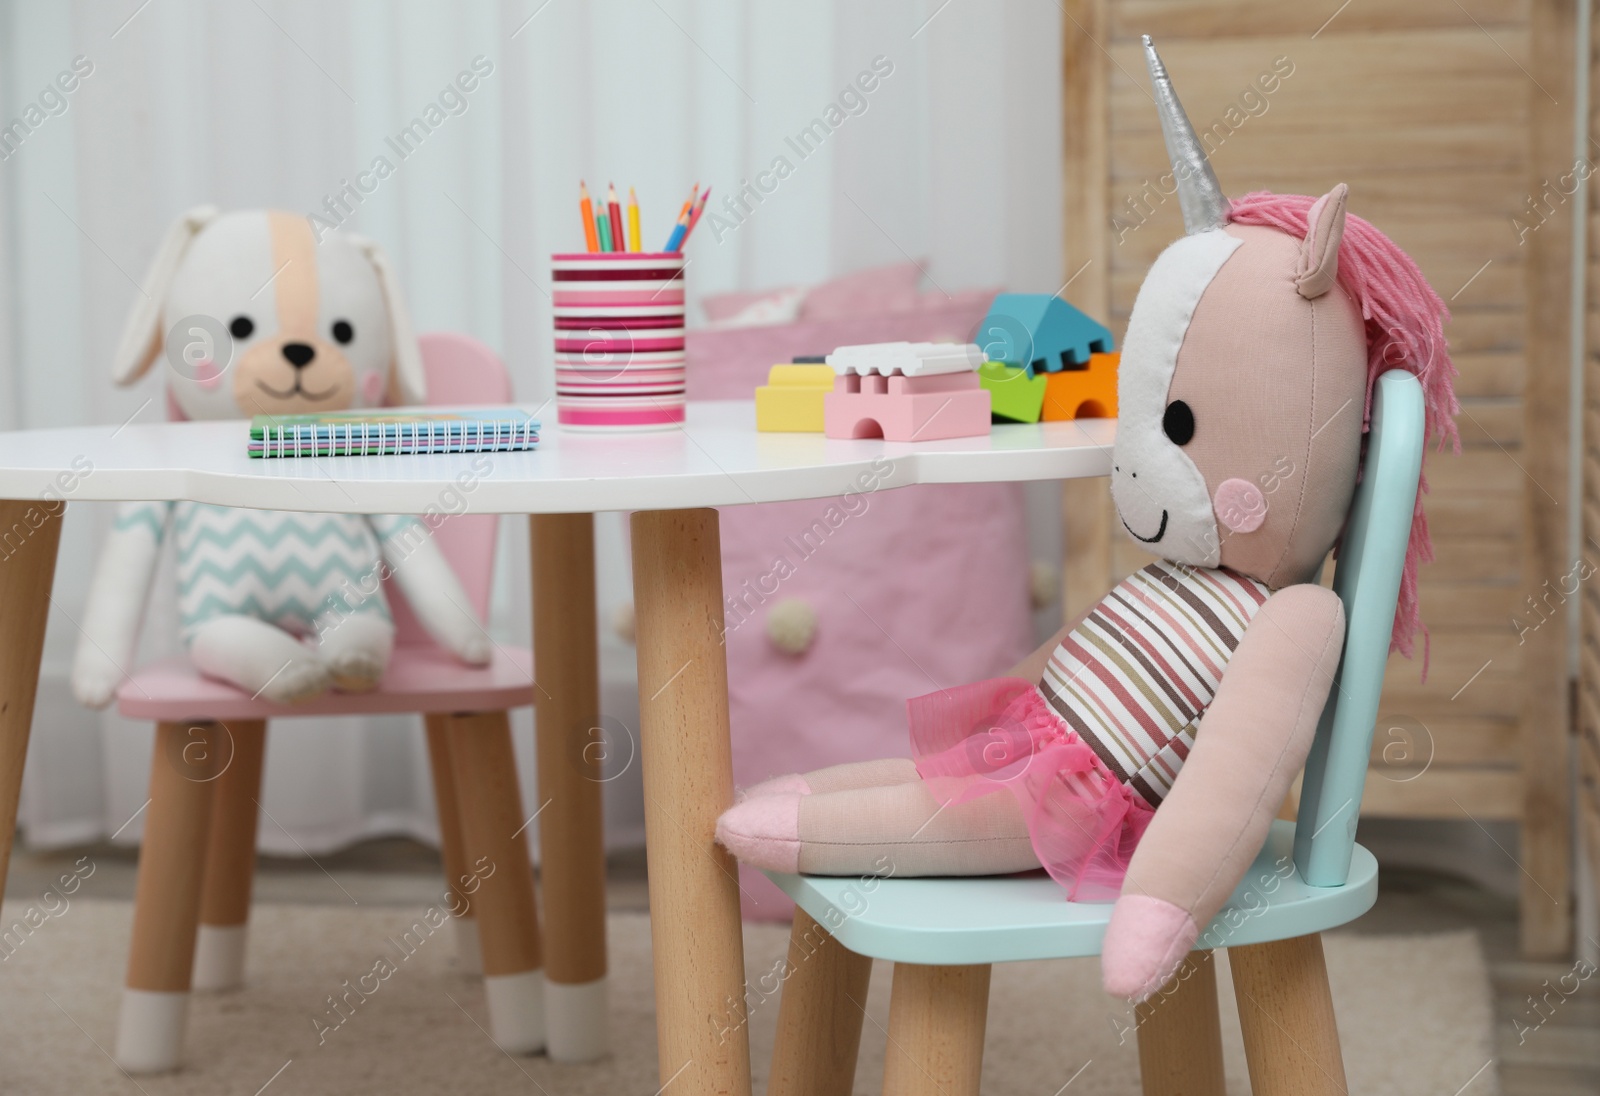 Photo of Cute toy unicorn and bunny on small chairs at table in playroom. Interior design